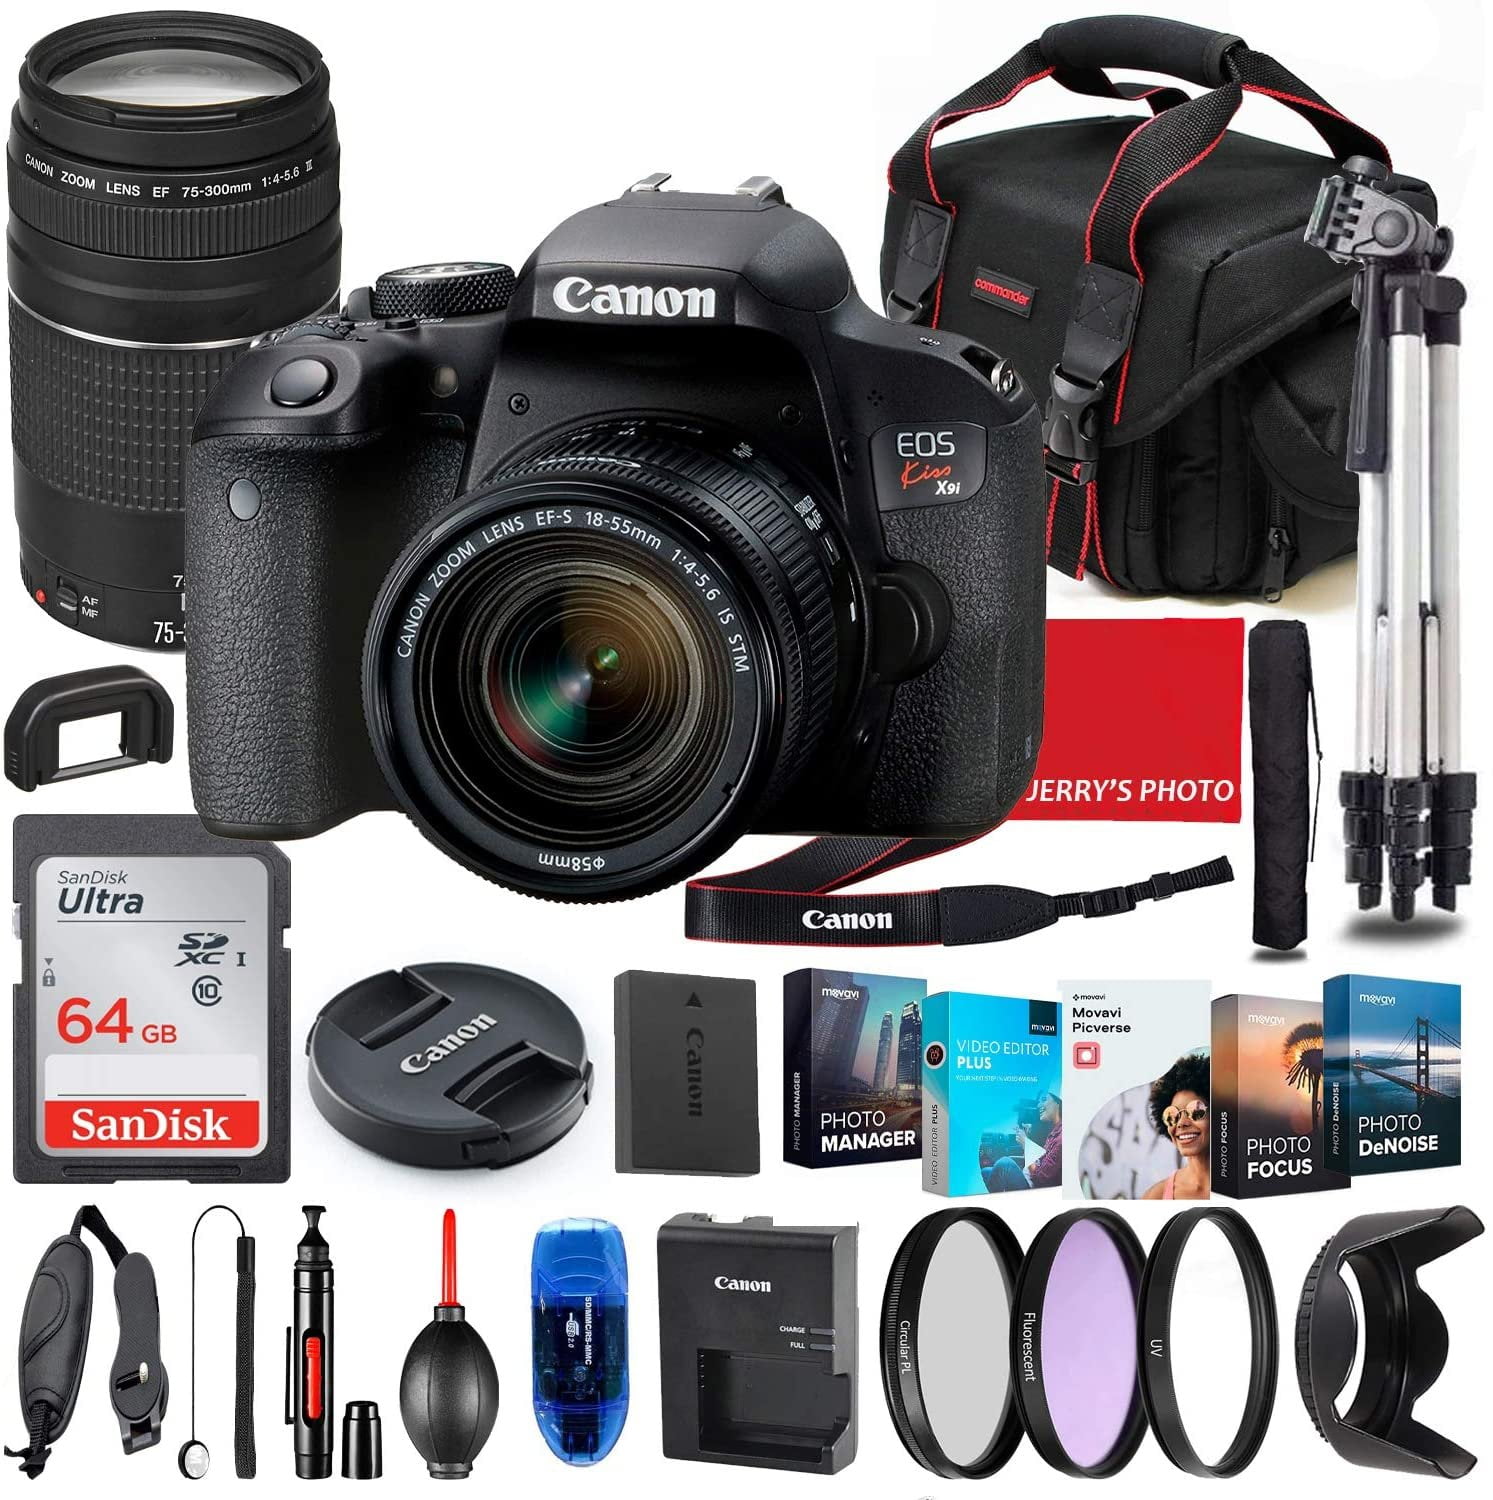 Canon EOS Kiss X9i (Rebel T7i) DSLR Camera with 18-55mm STM & 75-300mm III  Lens Bundle + Premium Accessory Bundle Including 64GB Memory, Filters,